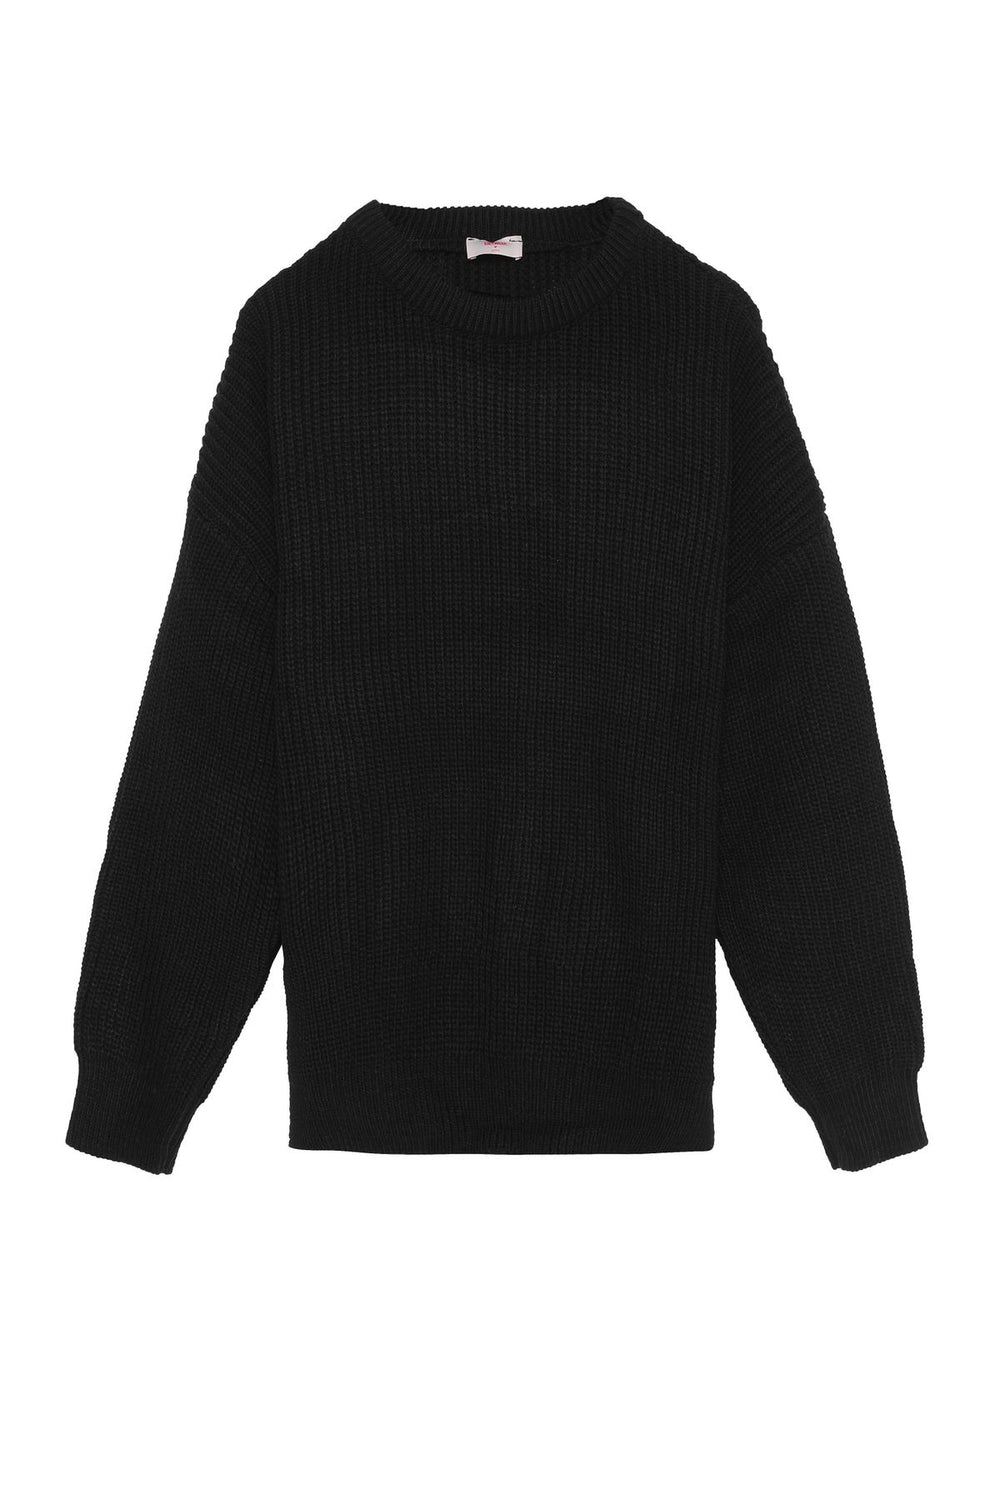 Crew Neck Knitted Sweater Black